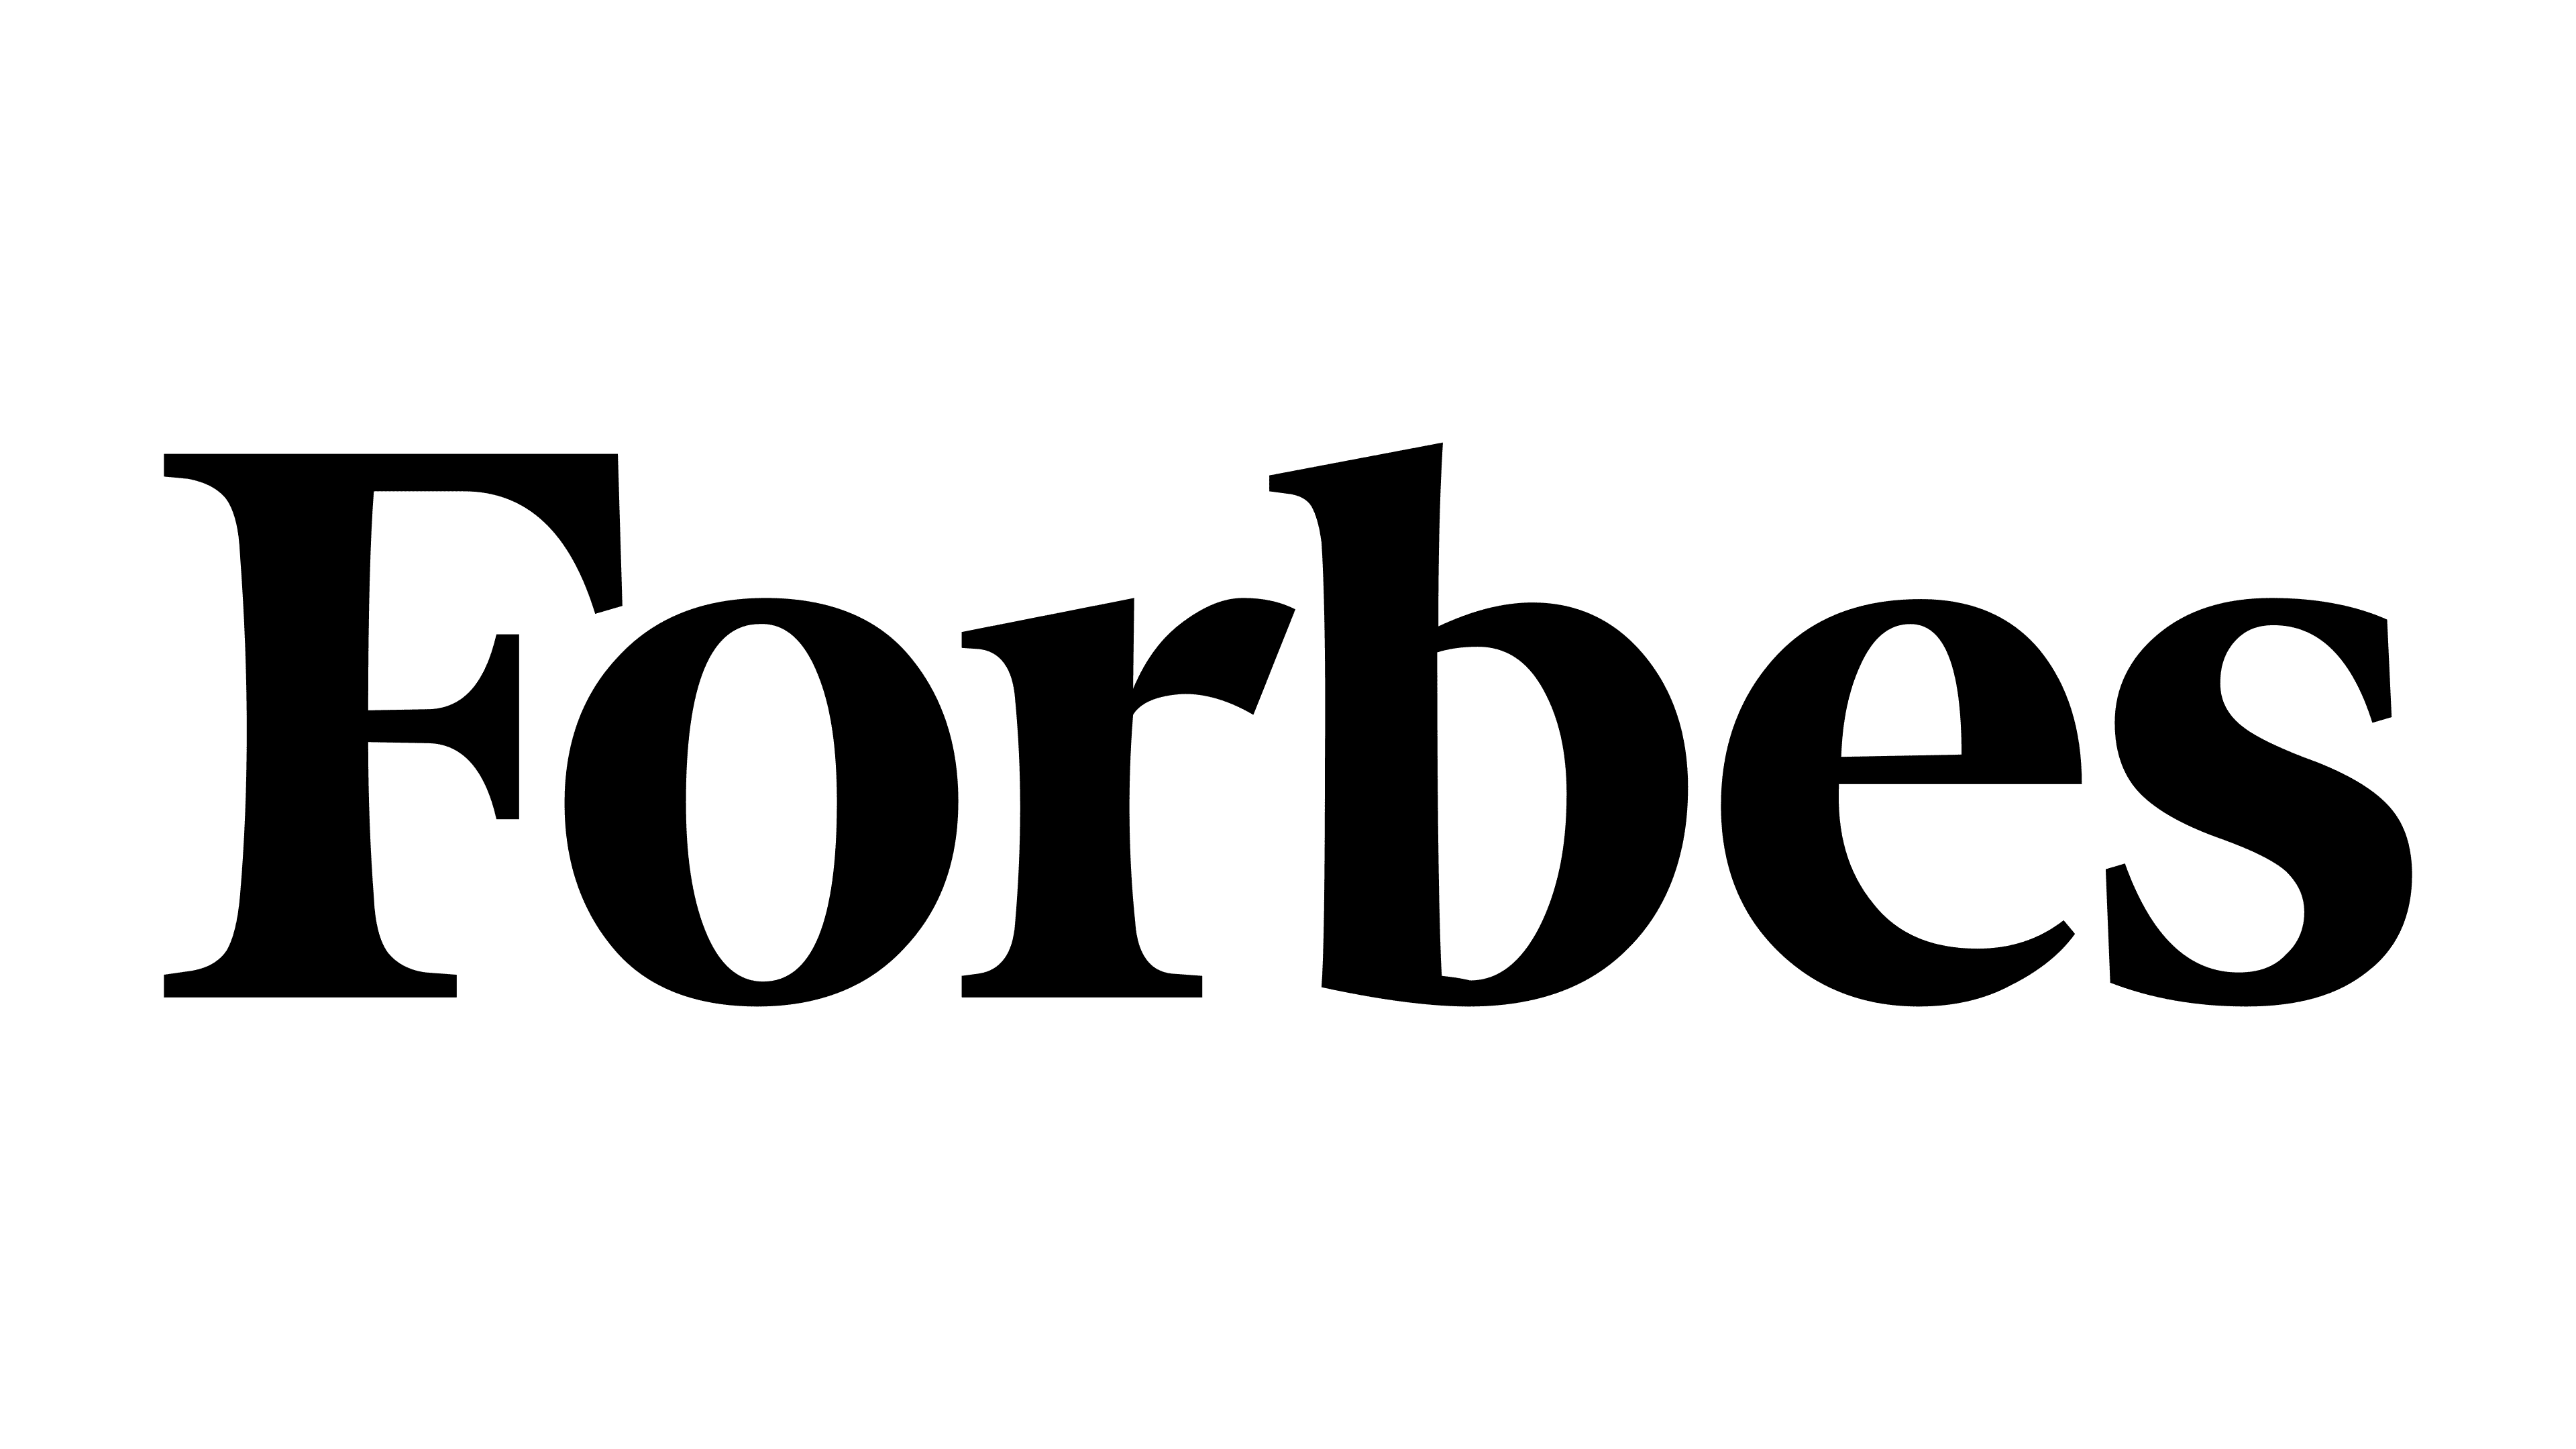 Forbes logo, representing the Forbes brand, prominently displayed as a feature in the 'Featured On' section of Techwink Services.